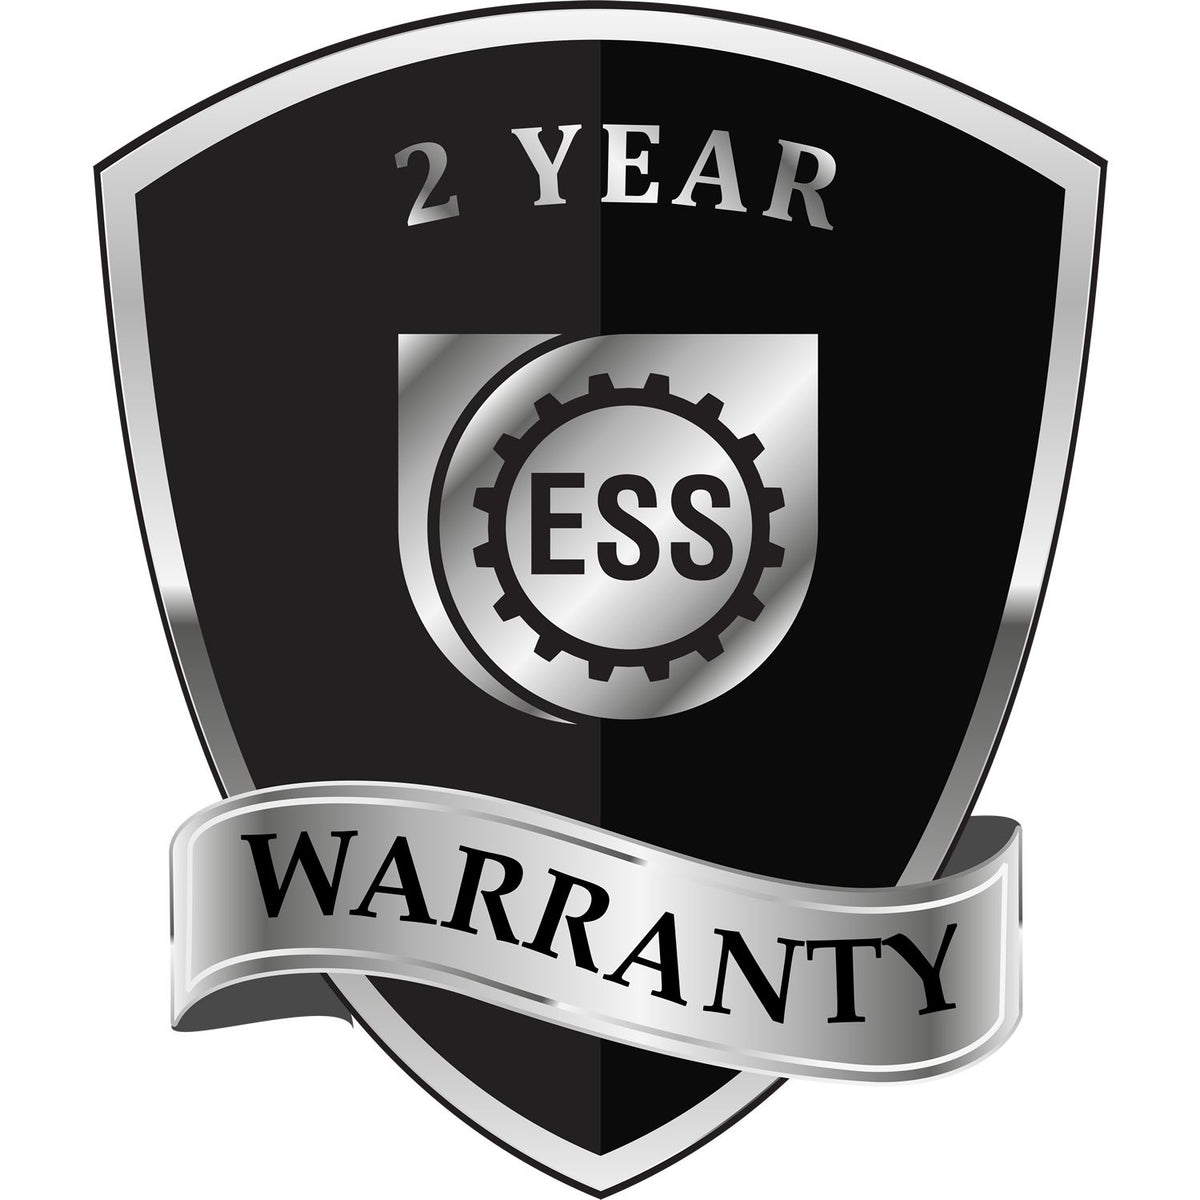 A badge or emblem showing a warranty icon for the Louisiana Desk Architect Embossing Seal